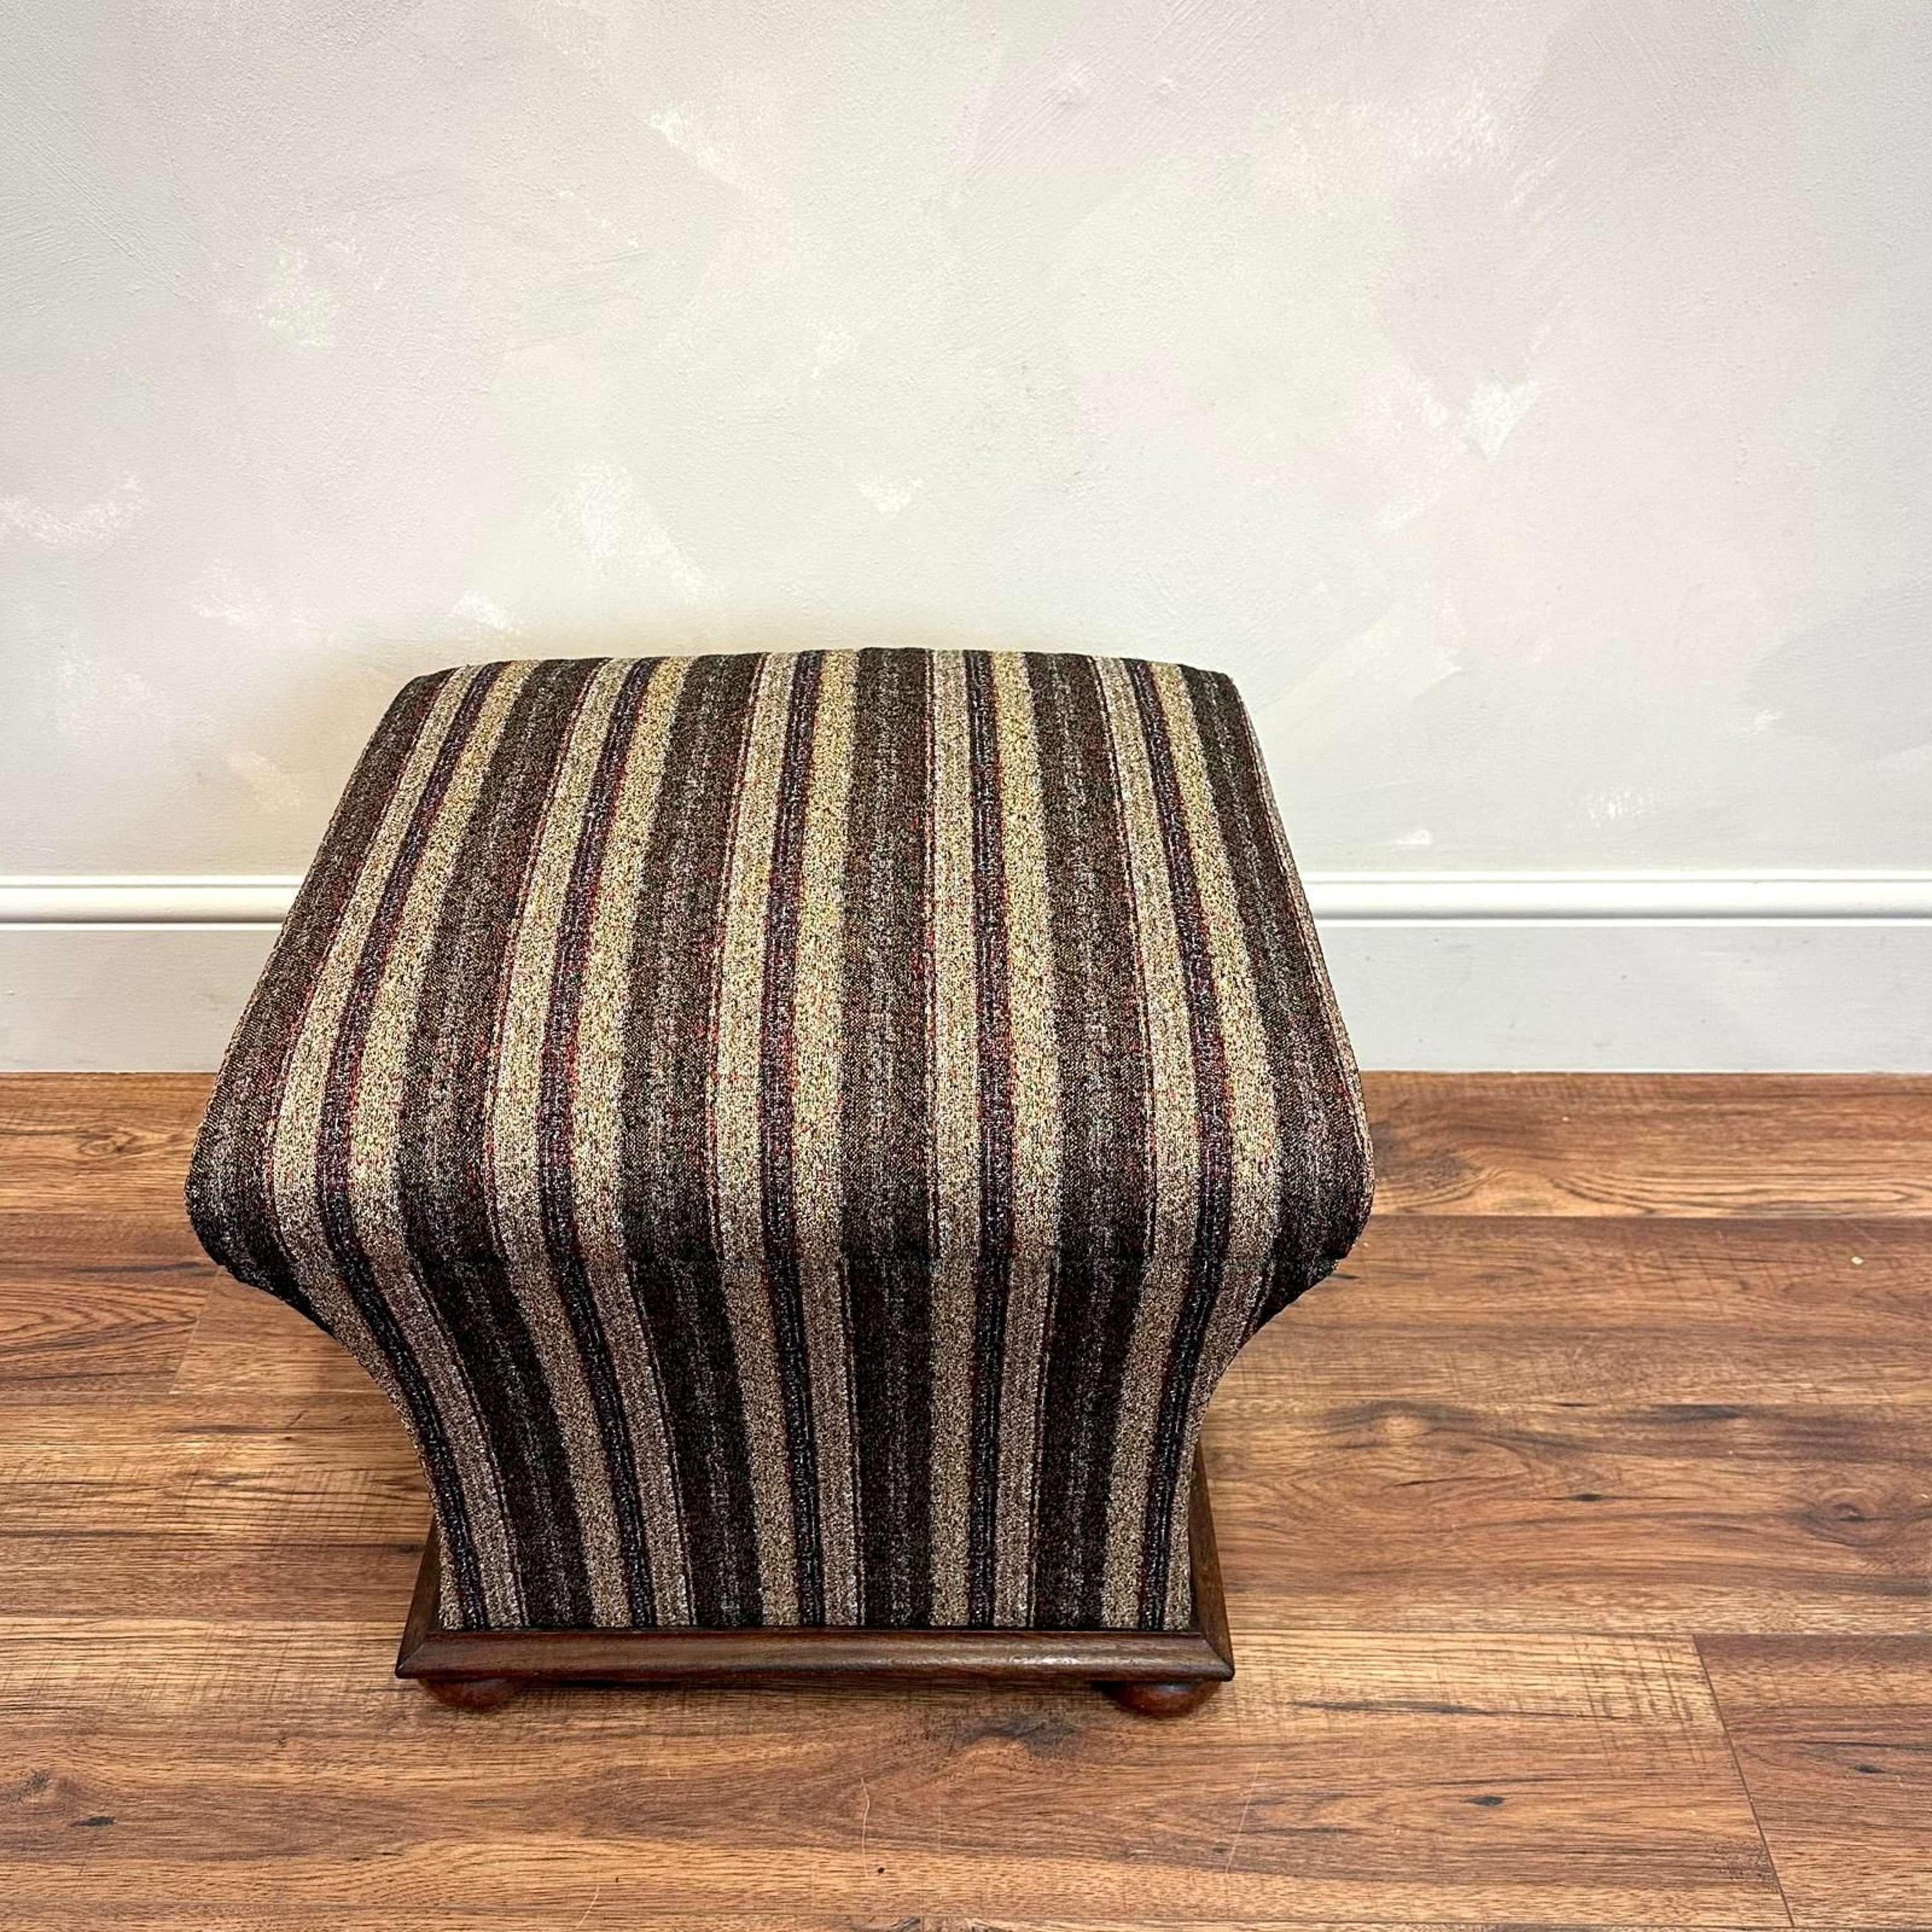 19th Century English Mahogany Upholstered Ottoman Footstool In Excellent Condition For Sale In Southampton, GB